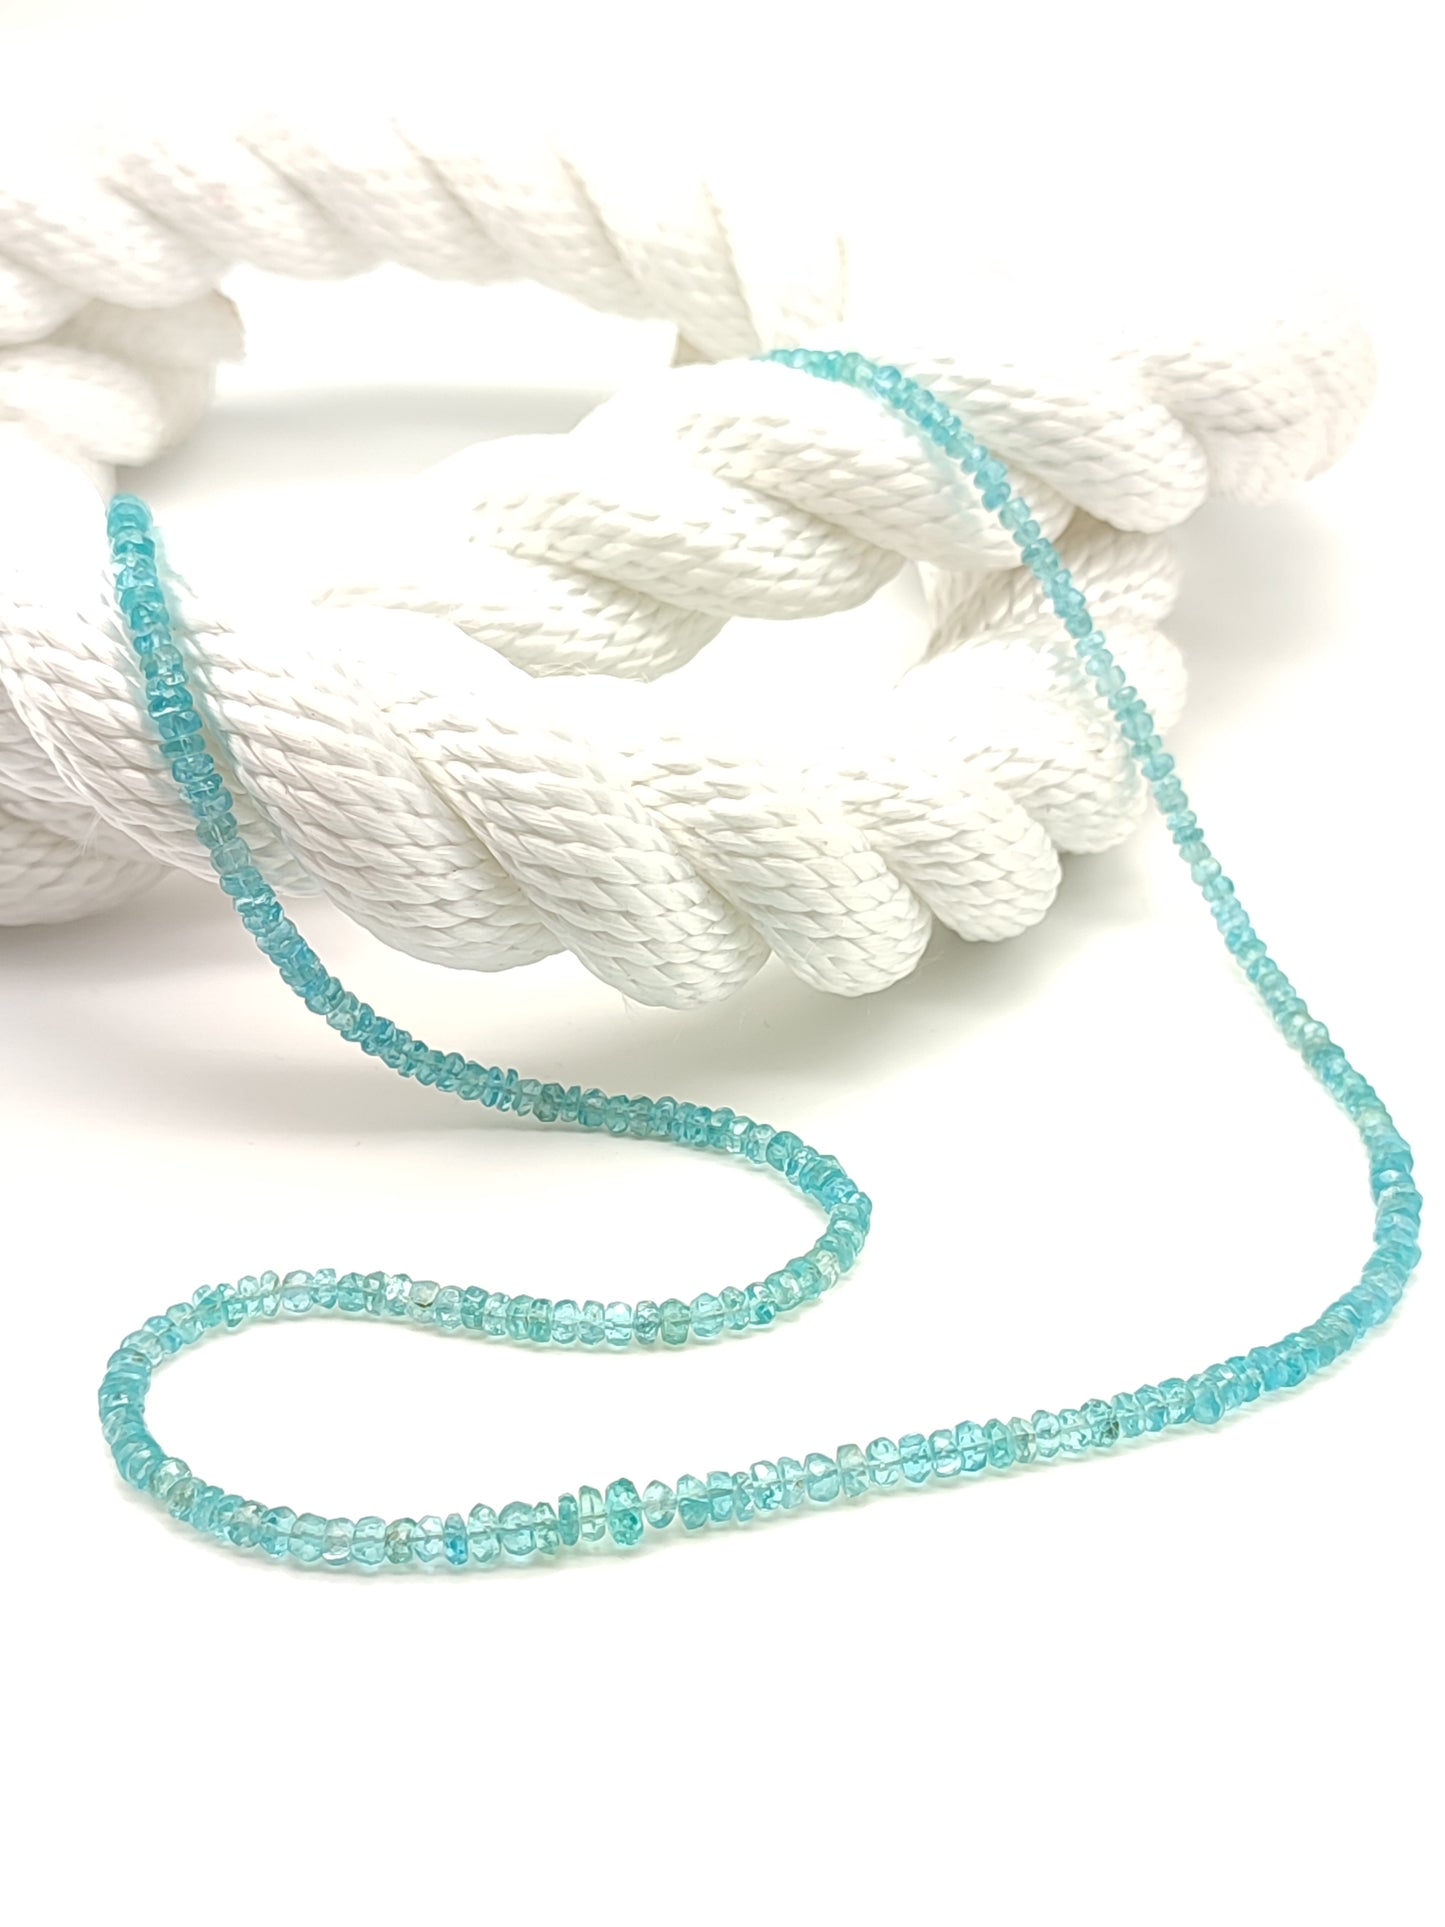 Silver necklace with apatite